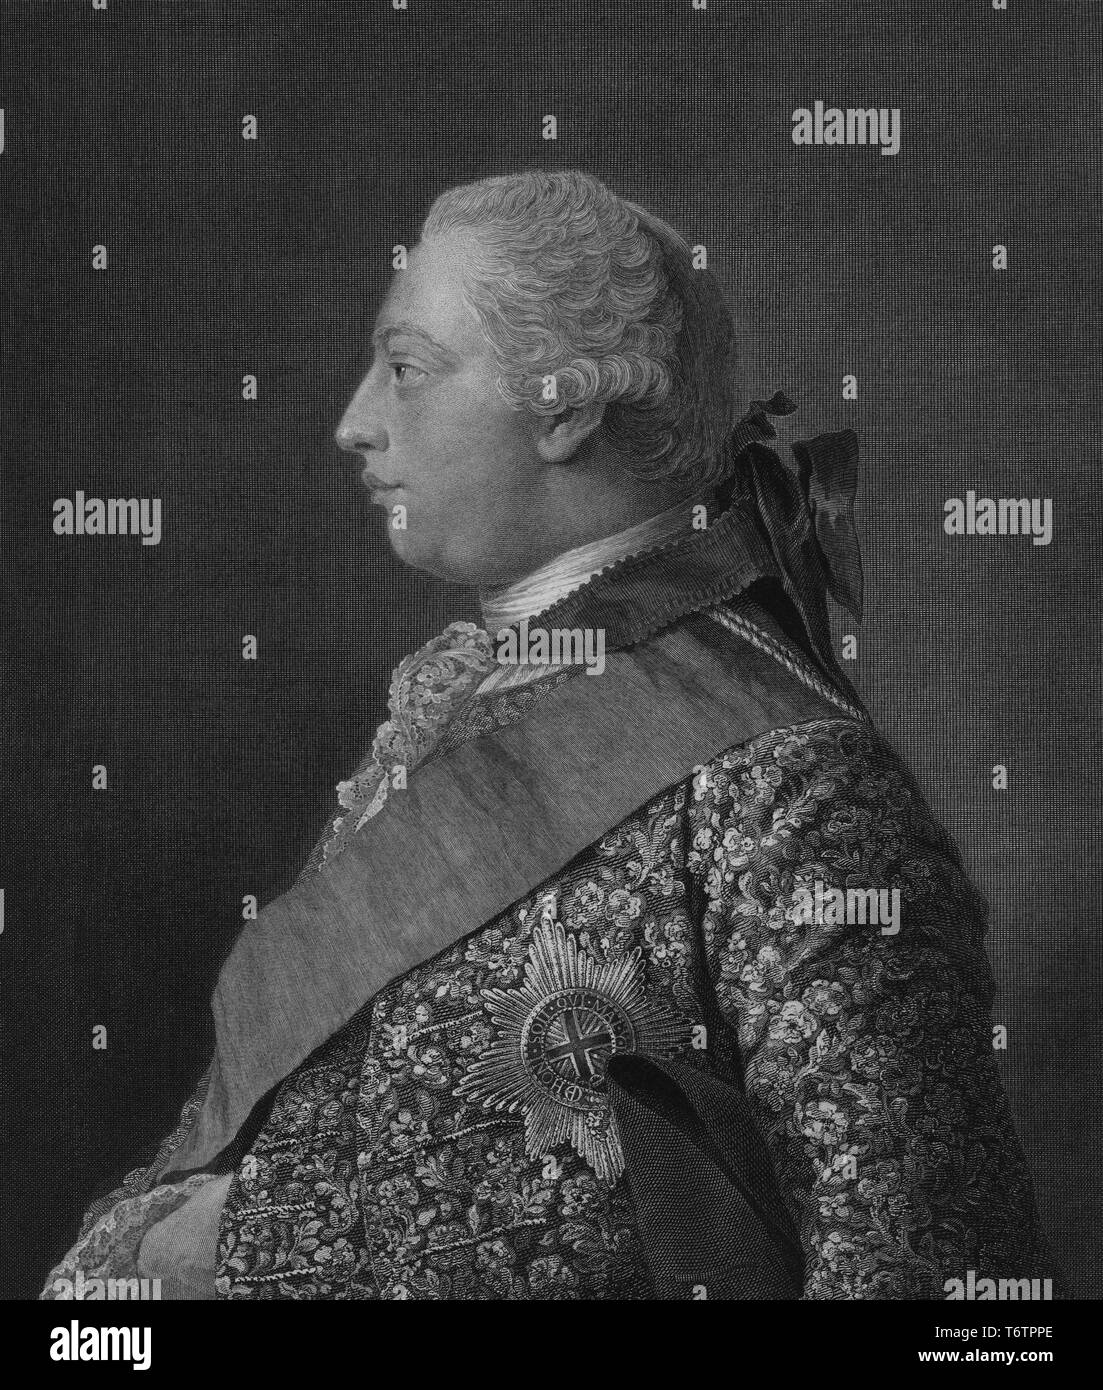 Engraved portrait of George William Frederick, George III of the United Kingdom, king of Great Britain, France and Ireland, 1754. From the New York Public Library. () Stock Photo